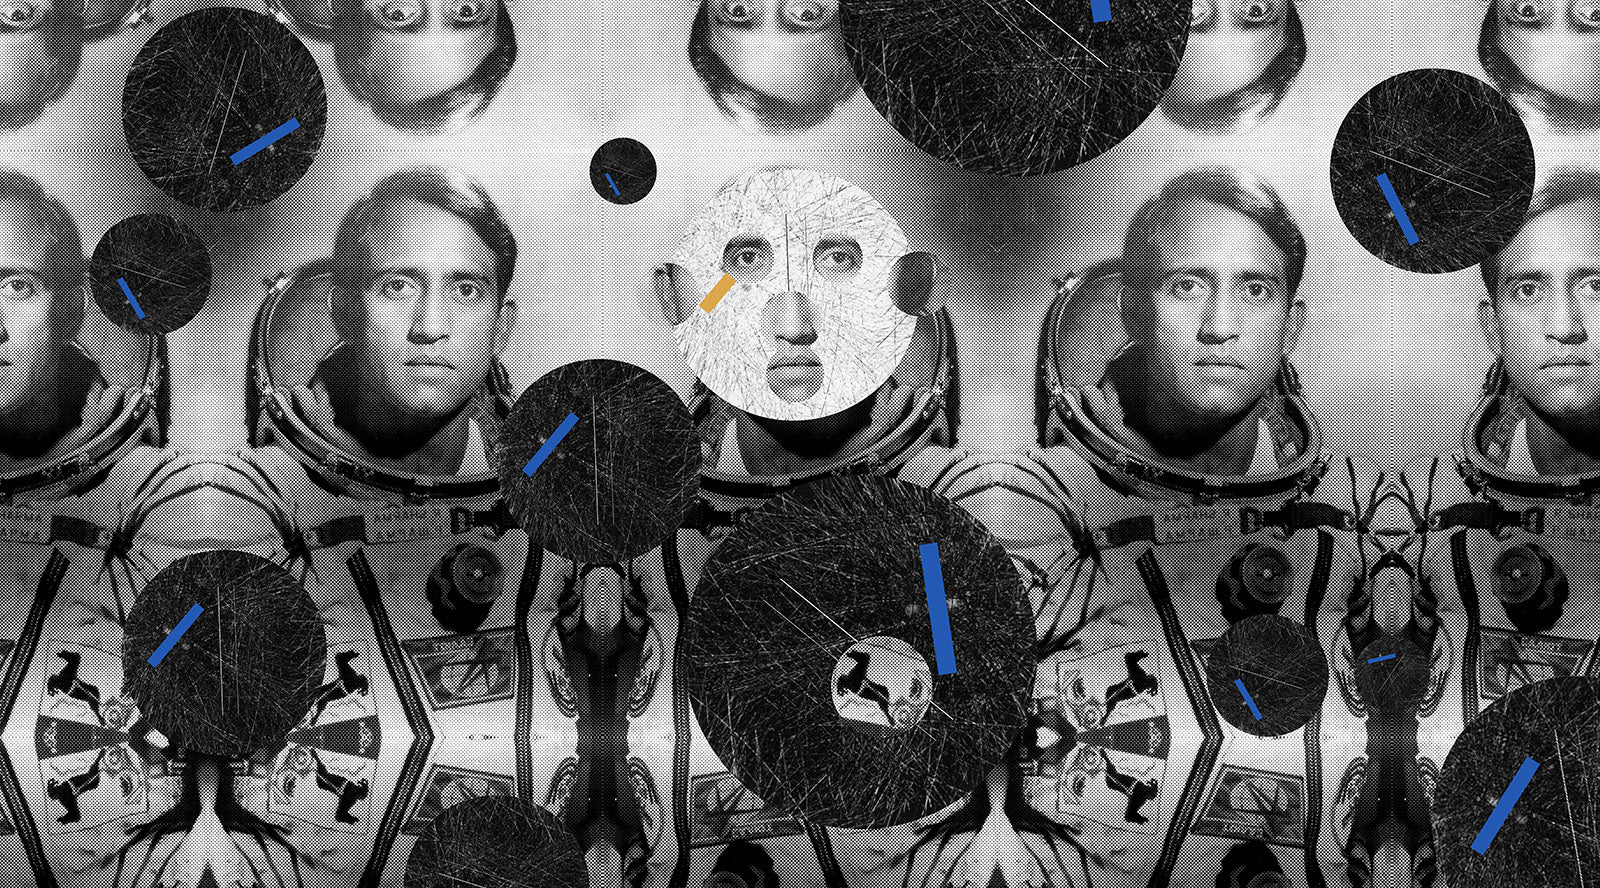 The First Indian Astronaut: The Story of Rakesh Sharma's 1984 mission and the artworks that it inspired